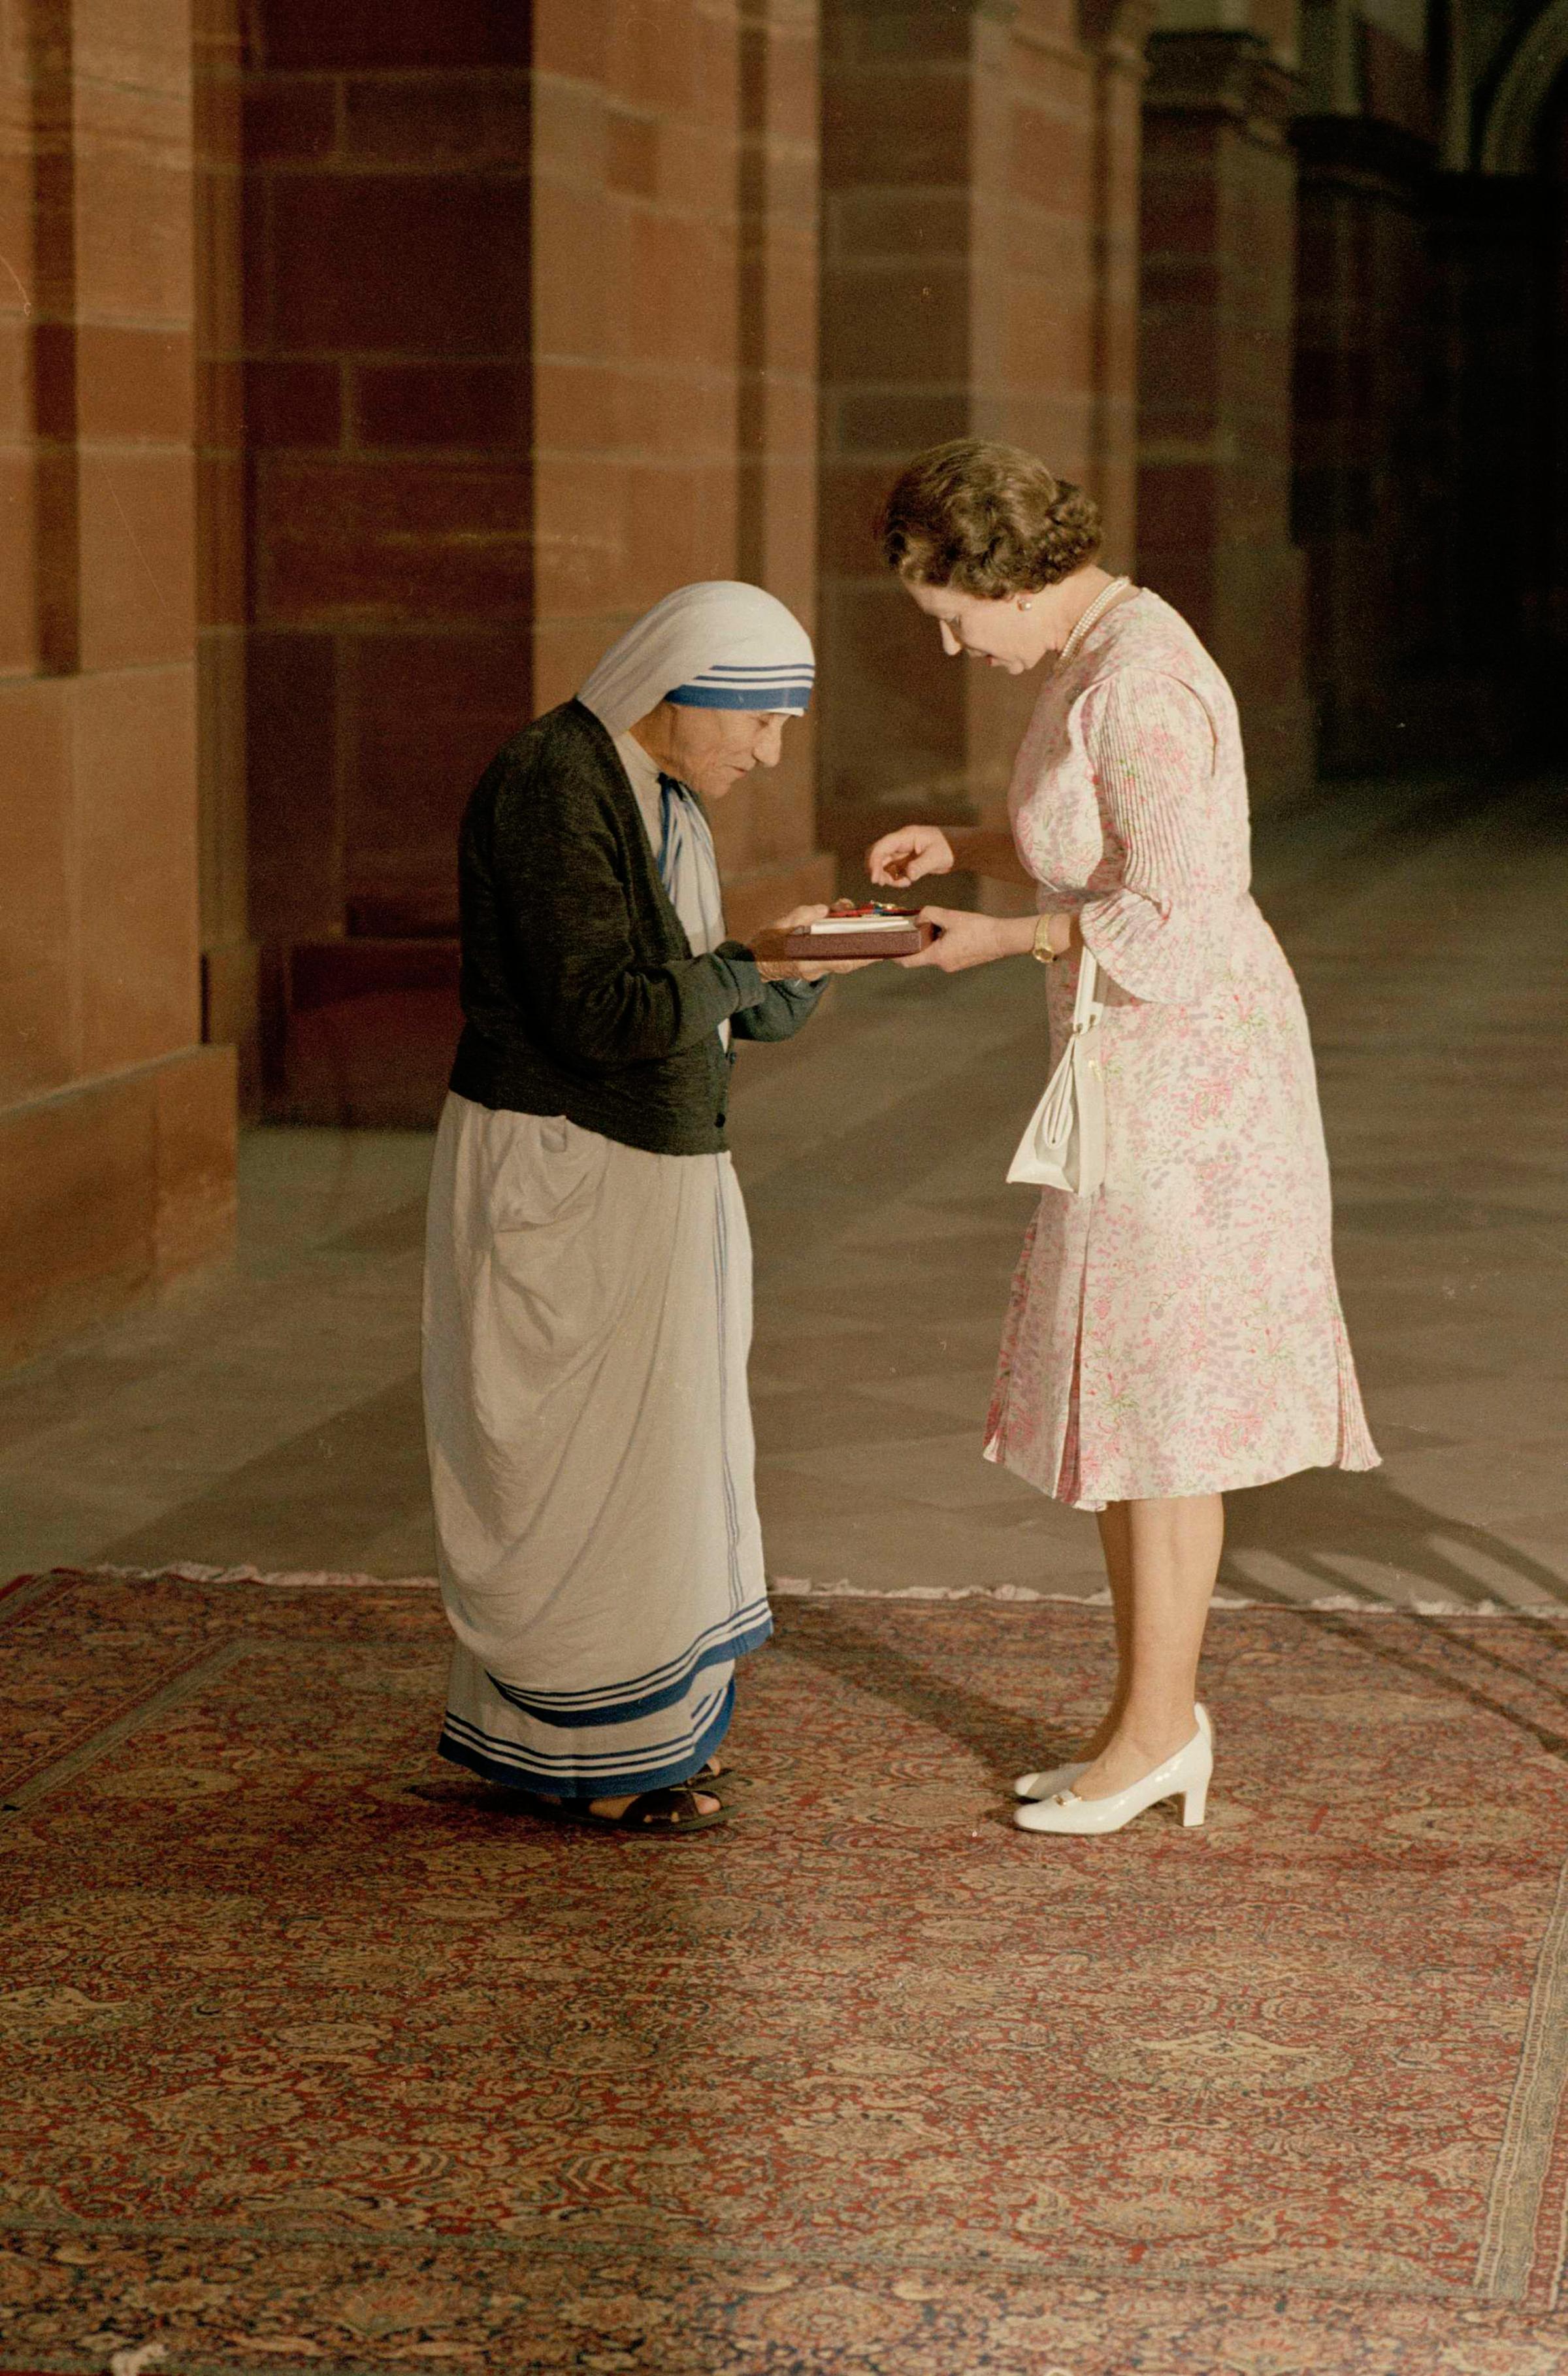 Queen Elizabeth II and Mother Teresa look at the Insignia of the Honorary Order of Merit, which she just presented to the Lady of Calcutta, at the Rashtrapati Shavar in New Delhi, India, on Nov. 24, 1983.